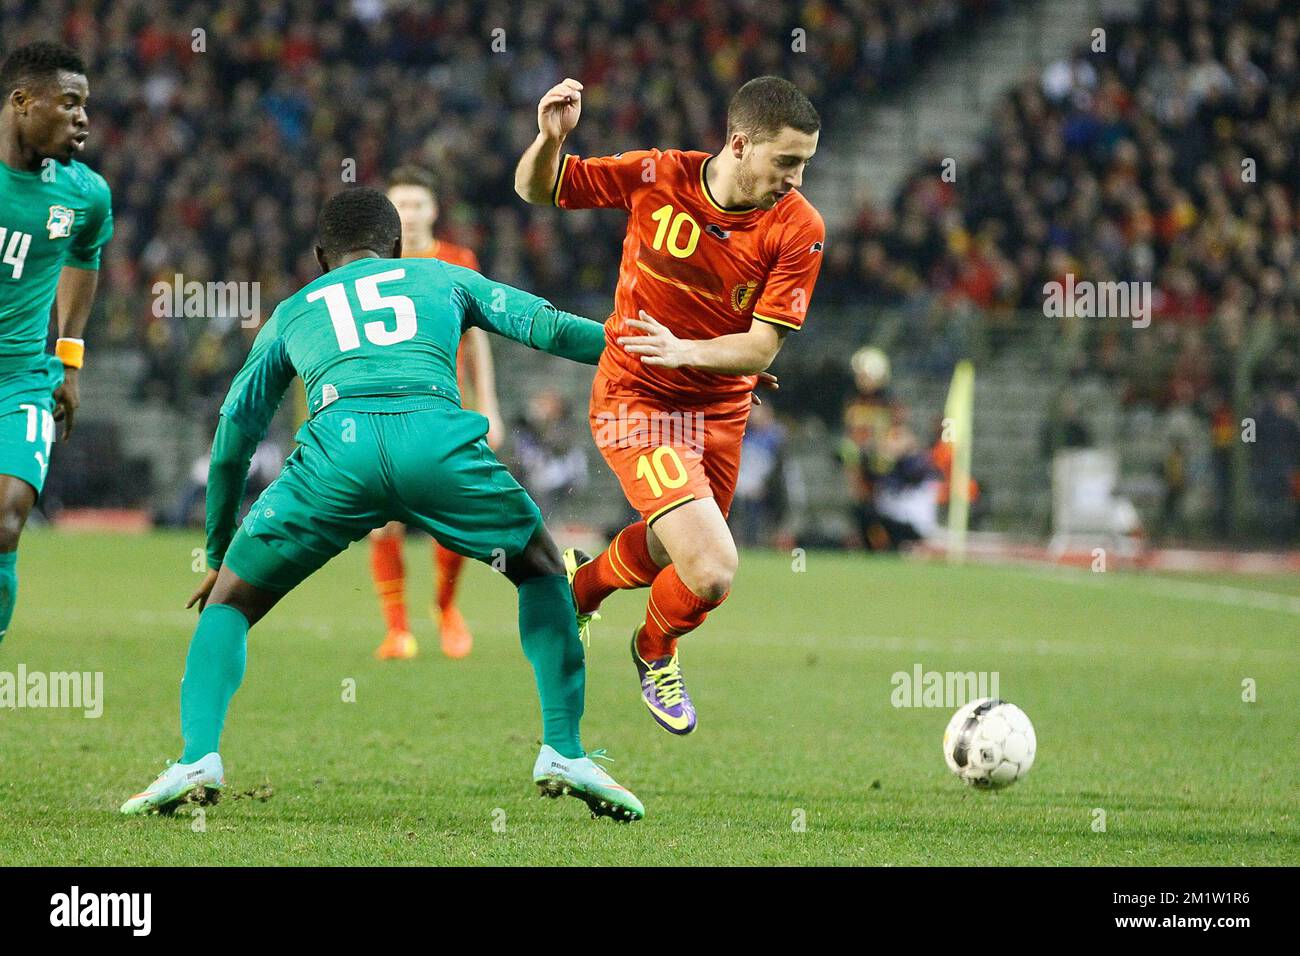 Ivory Coast's Max Gradel and Belgium's Eden Hazard fight for the ball during a friendly soccer game between the Belgian national team the Red Devils and Ivory Coast, Wednesday 05 March 2014 in Brussels.  Stock Photo